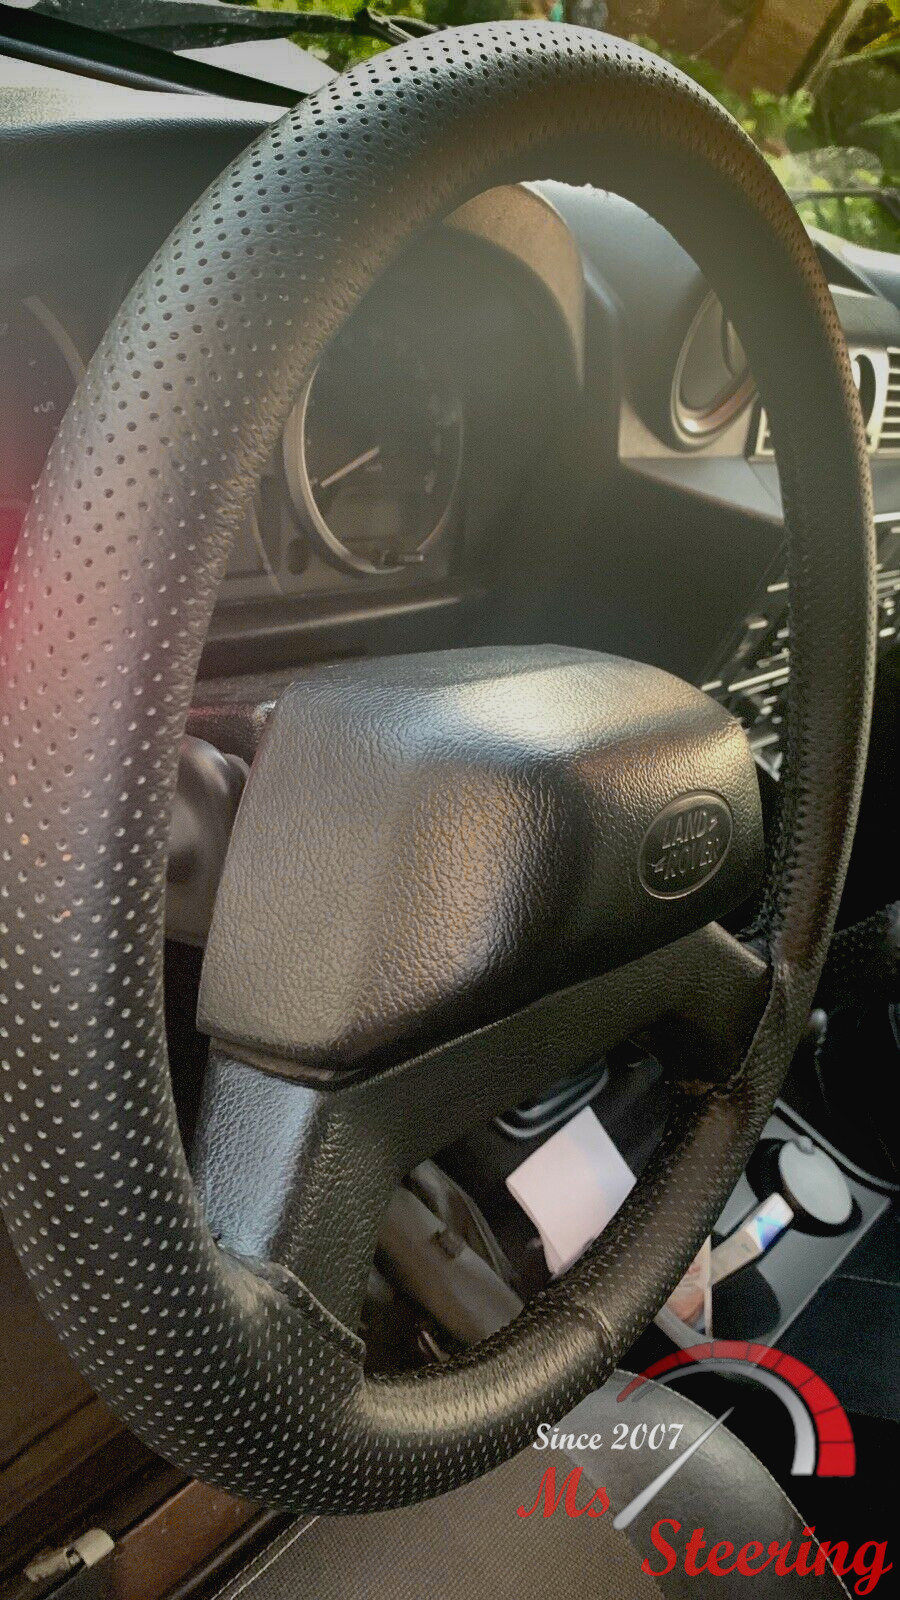 PERFORATED  LEATHER STEERING WHEEL COVER FOR DATSUN MI-DO BLACK SEAM - $49.99